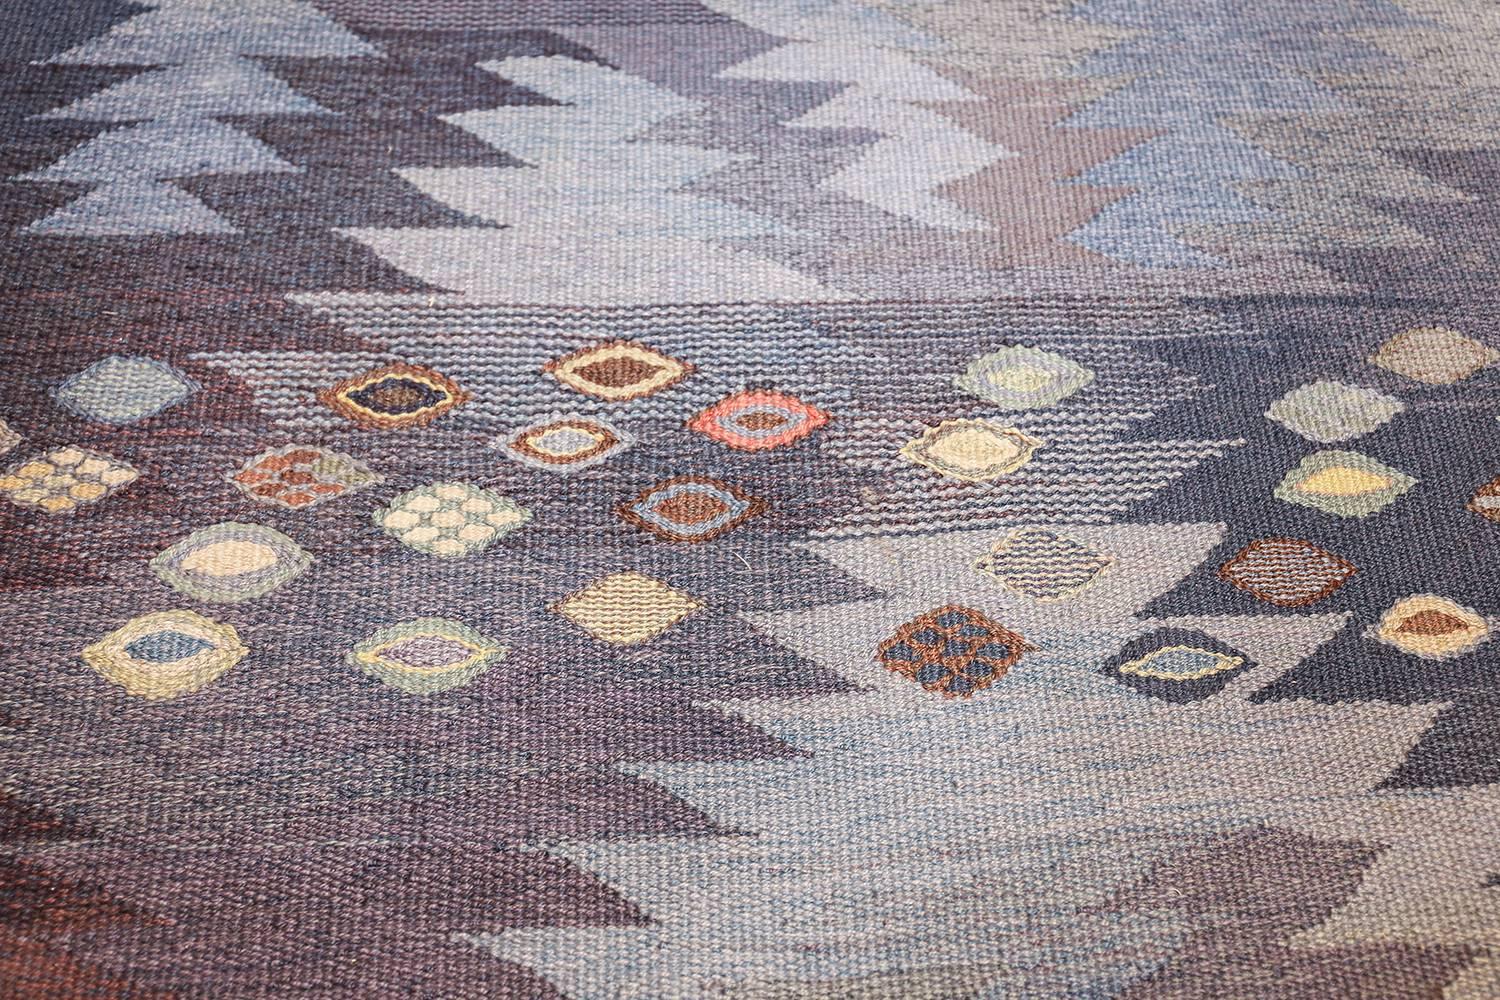 Breathtaking vintage Marta Maas Scandinavian Tanga rug by Barbro Nilsson, country of origin / Rug type: Scandinavia Rug, circa date mid–20th century. This stunning blue vintage Scandinavian Marta Maas rug by Barbro Nilsson features one of her most